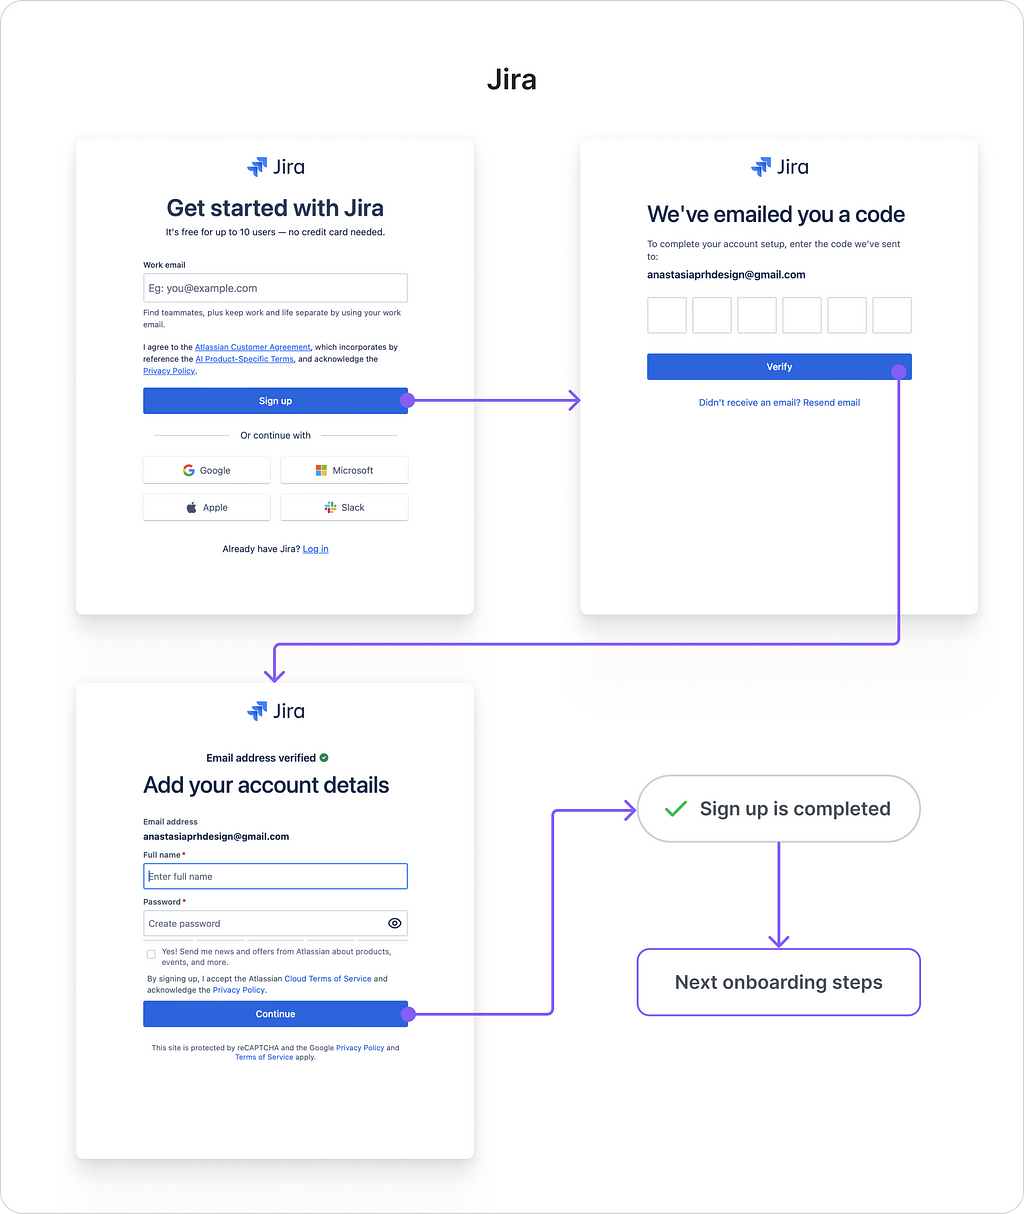 Jira’s sign-up flow.